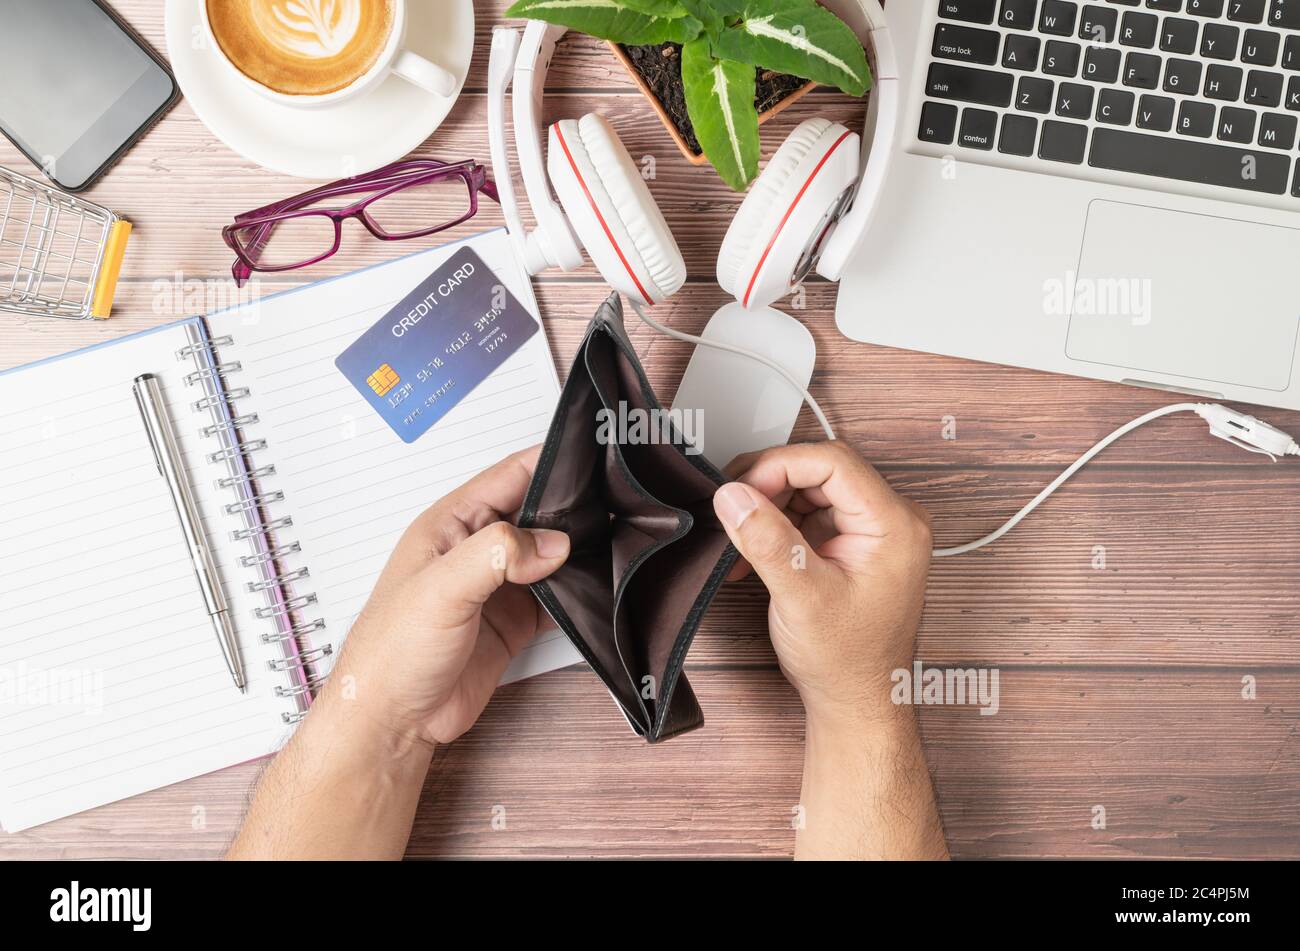 A man open wallet without money on the desk consisting of credit cards on notebook,  laptop computers with headphones and coffee, shopping online and Stock Photo